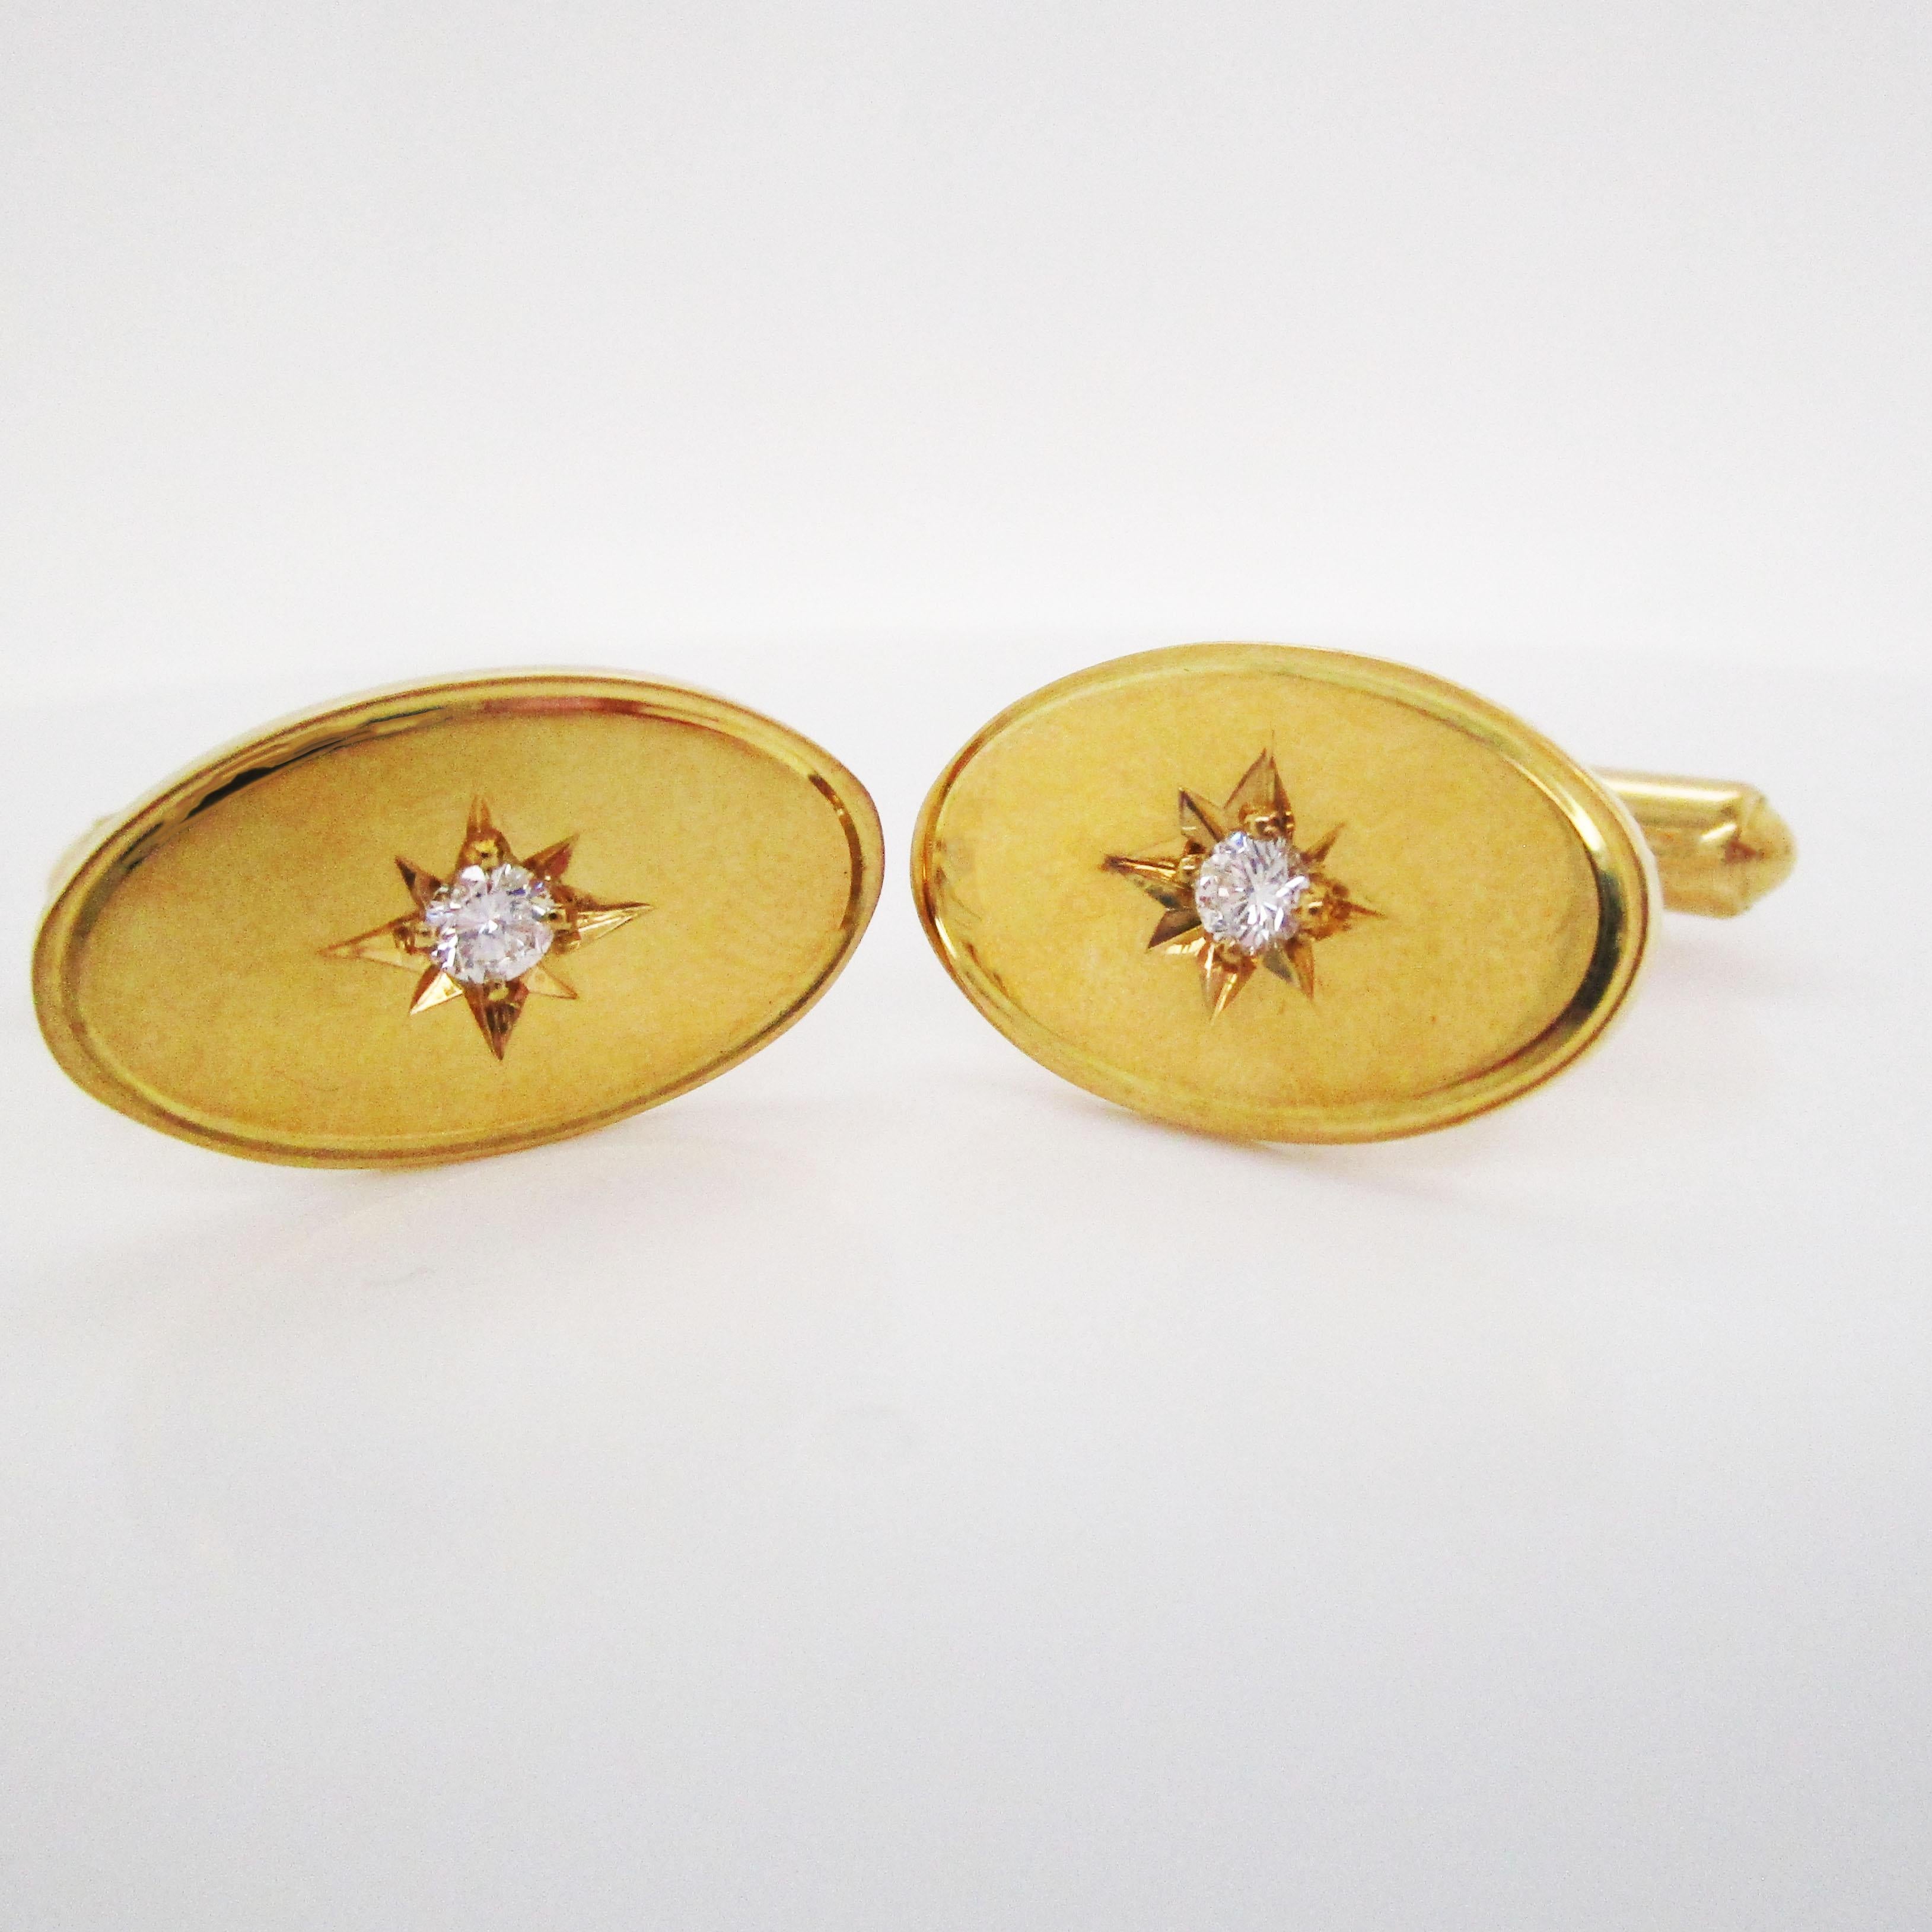 These cufflinks are rich 18k yellow gold and boast a gorgeous brilliant white diamond nestled in the center of the star set detailing on an oval panel. The classic oval star set design makes them elegant, understated, and sophisticated. At the